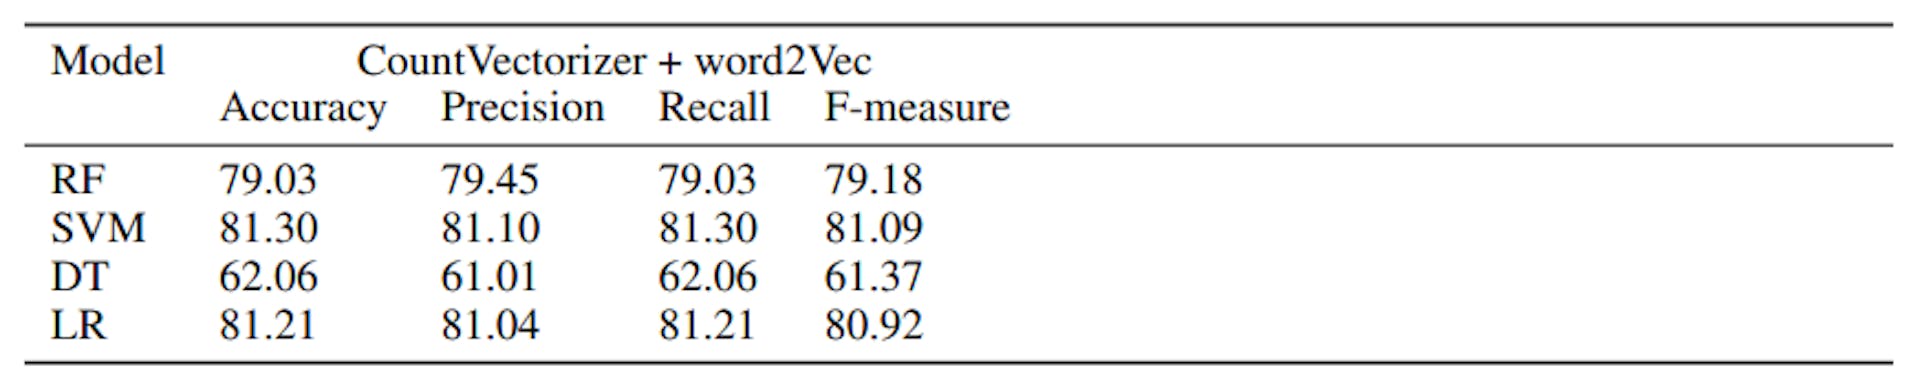 Table 7: Precision, Recall, Accuracy, and F-Measure values for CountVectorizer + word2Vec